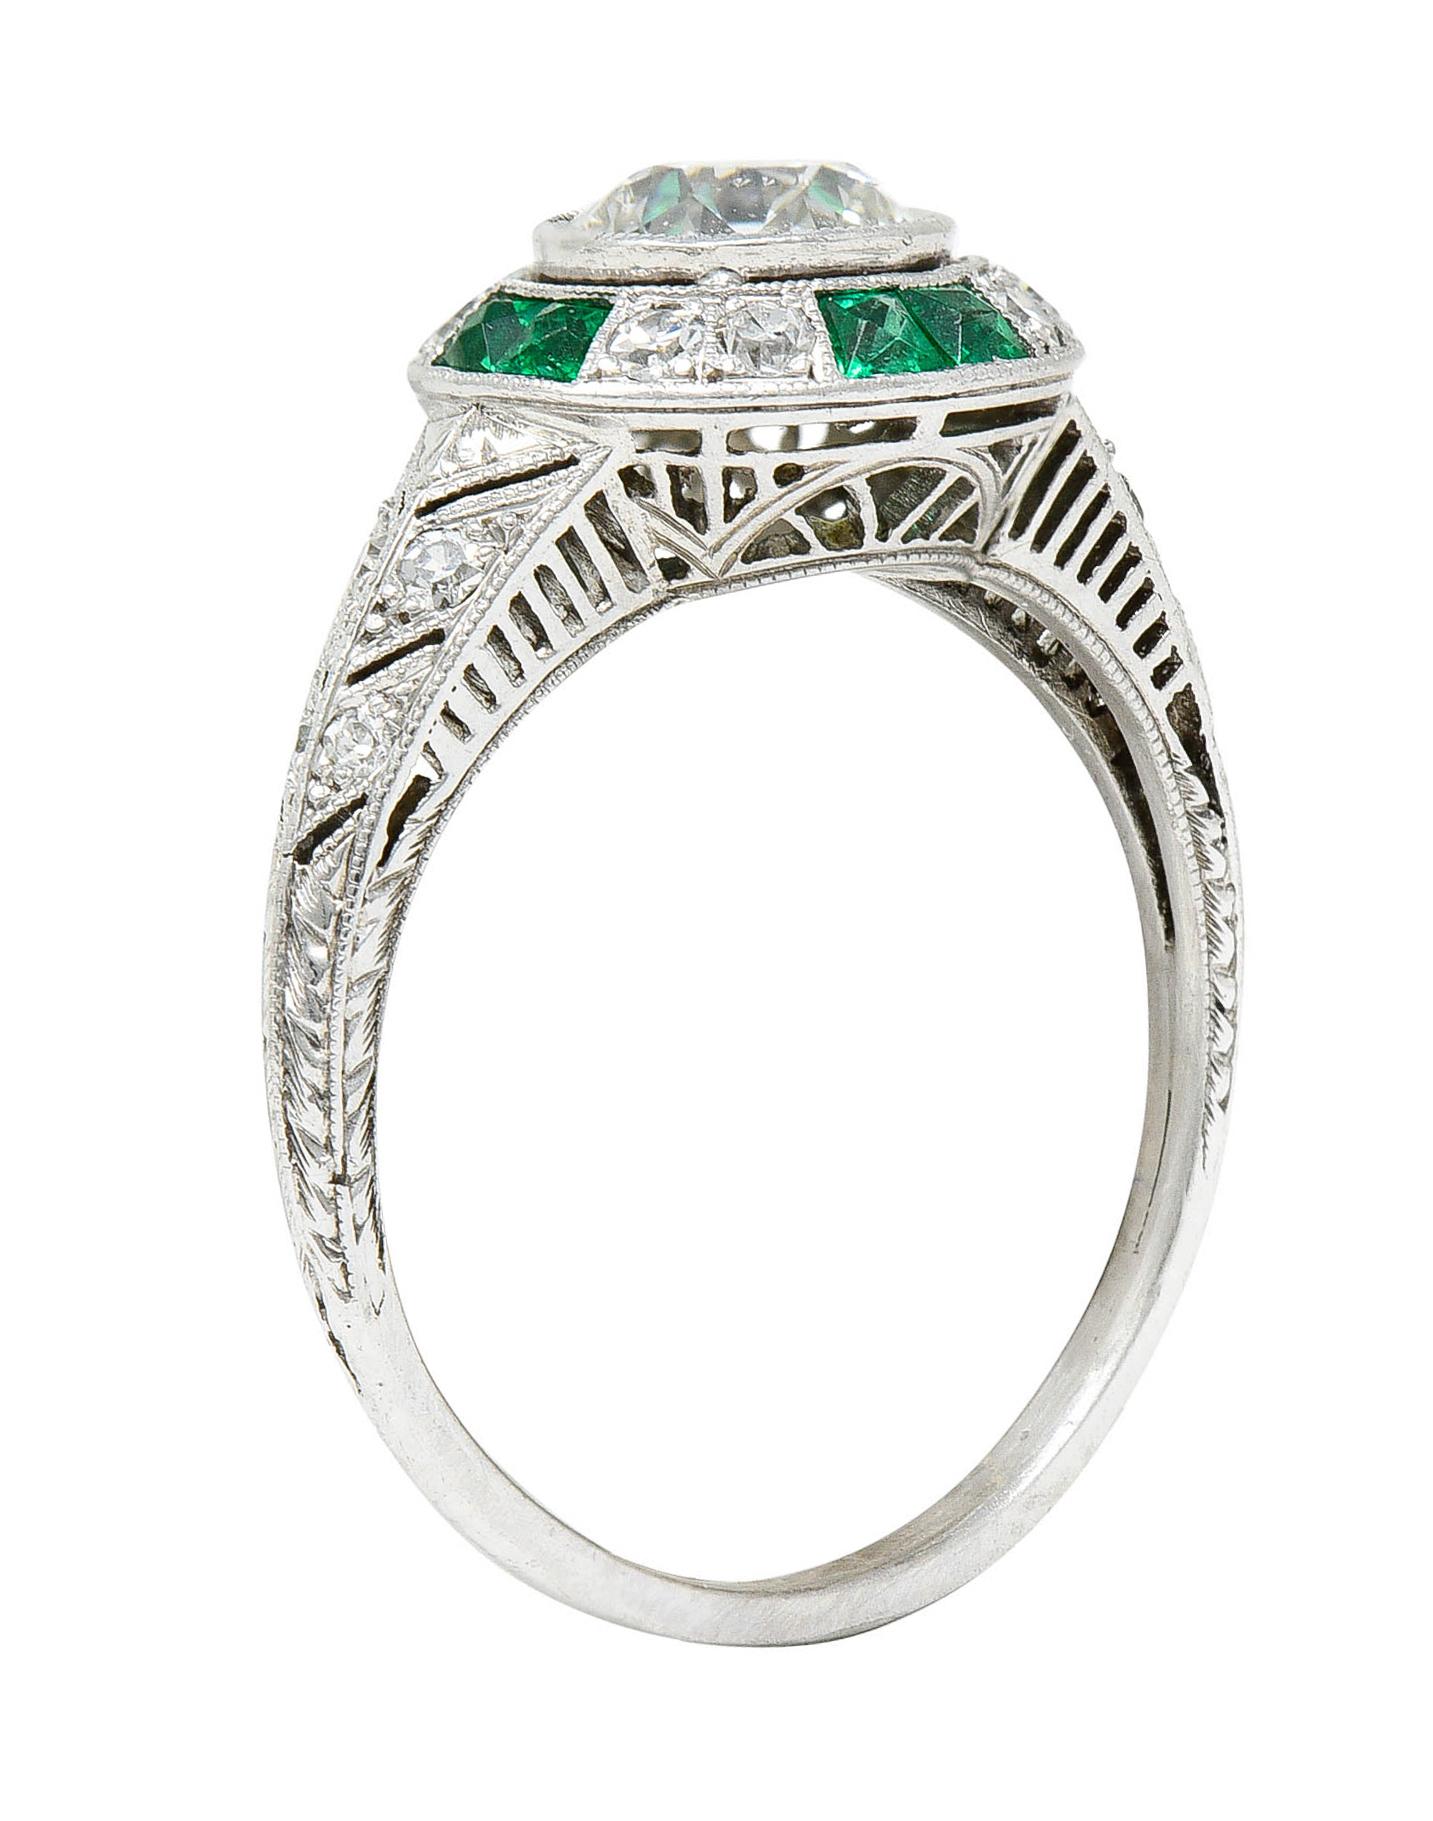 Centering an old European cut diamond weighing approximately 0.80 carat - H color with VS2 clarity

Bezel set with a diamond and emerald circular halo surround

French cut emeralds are bright green and well matched while weighing in total